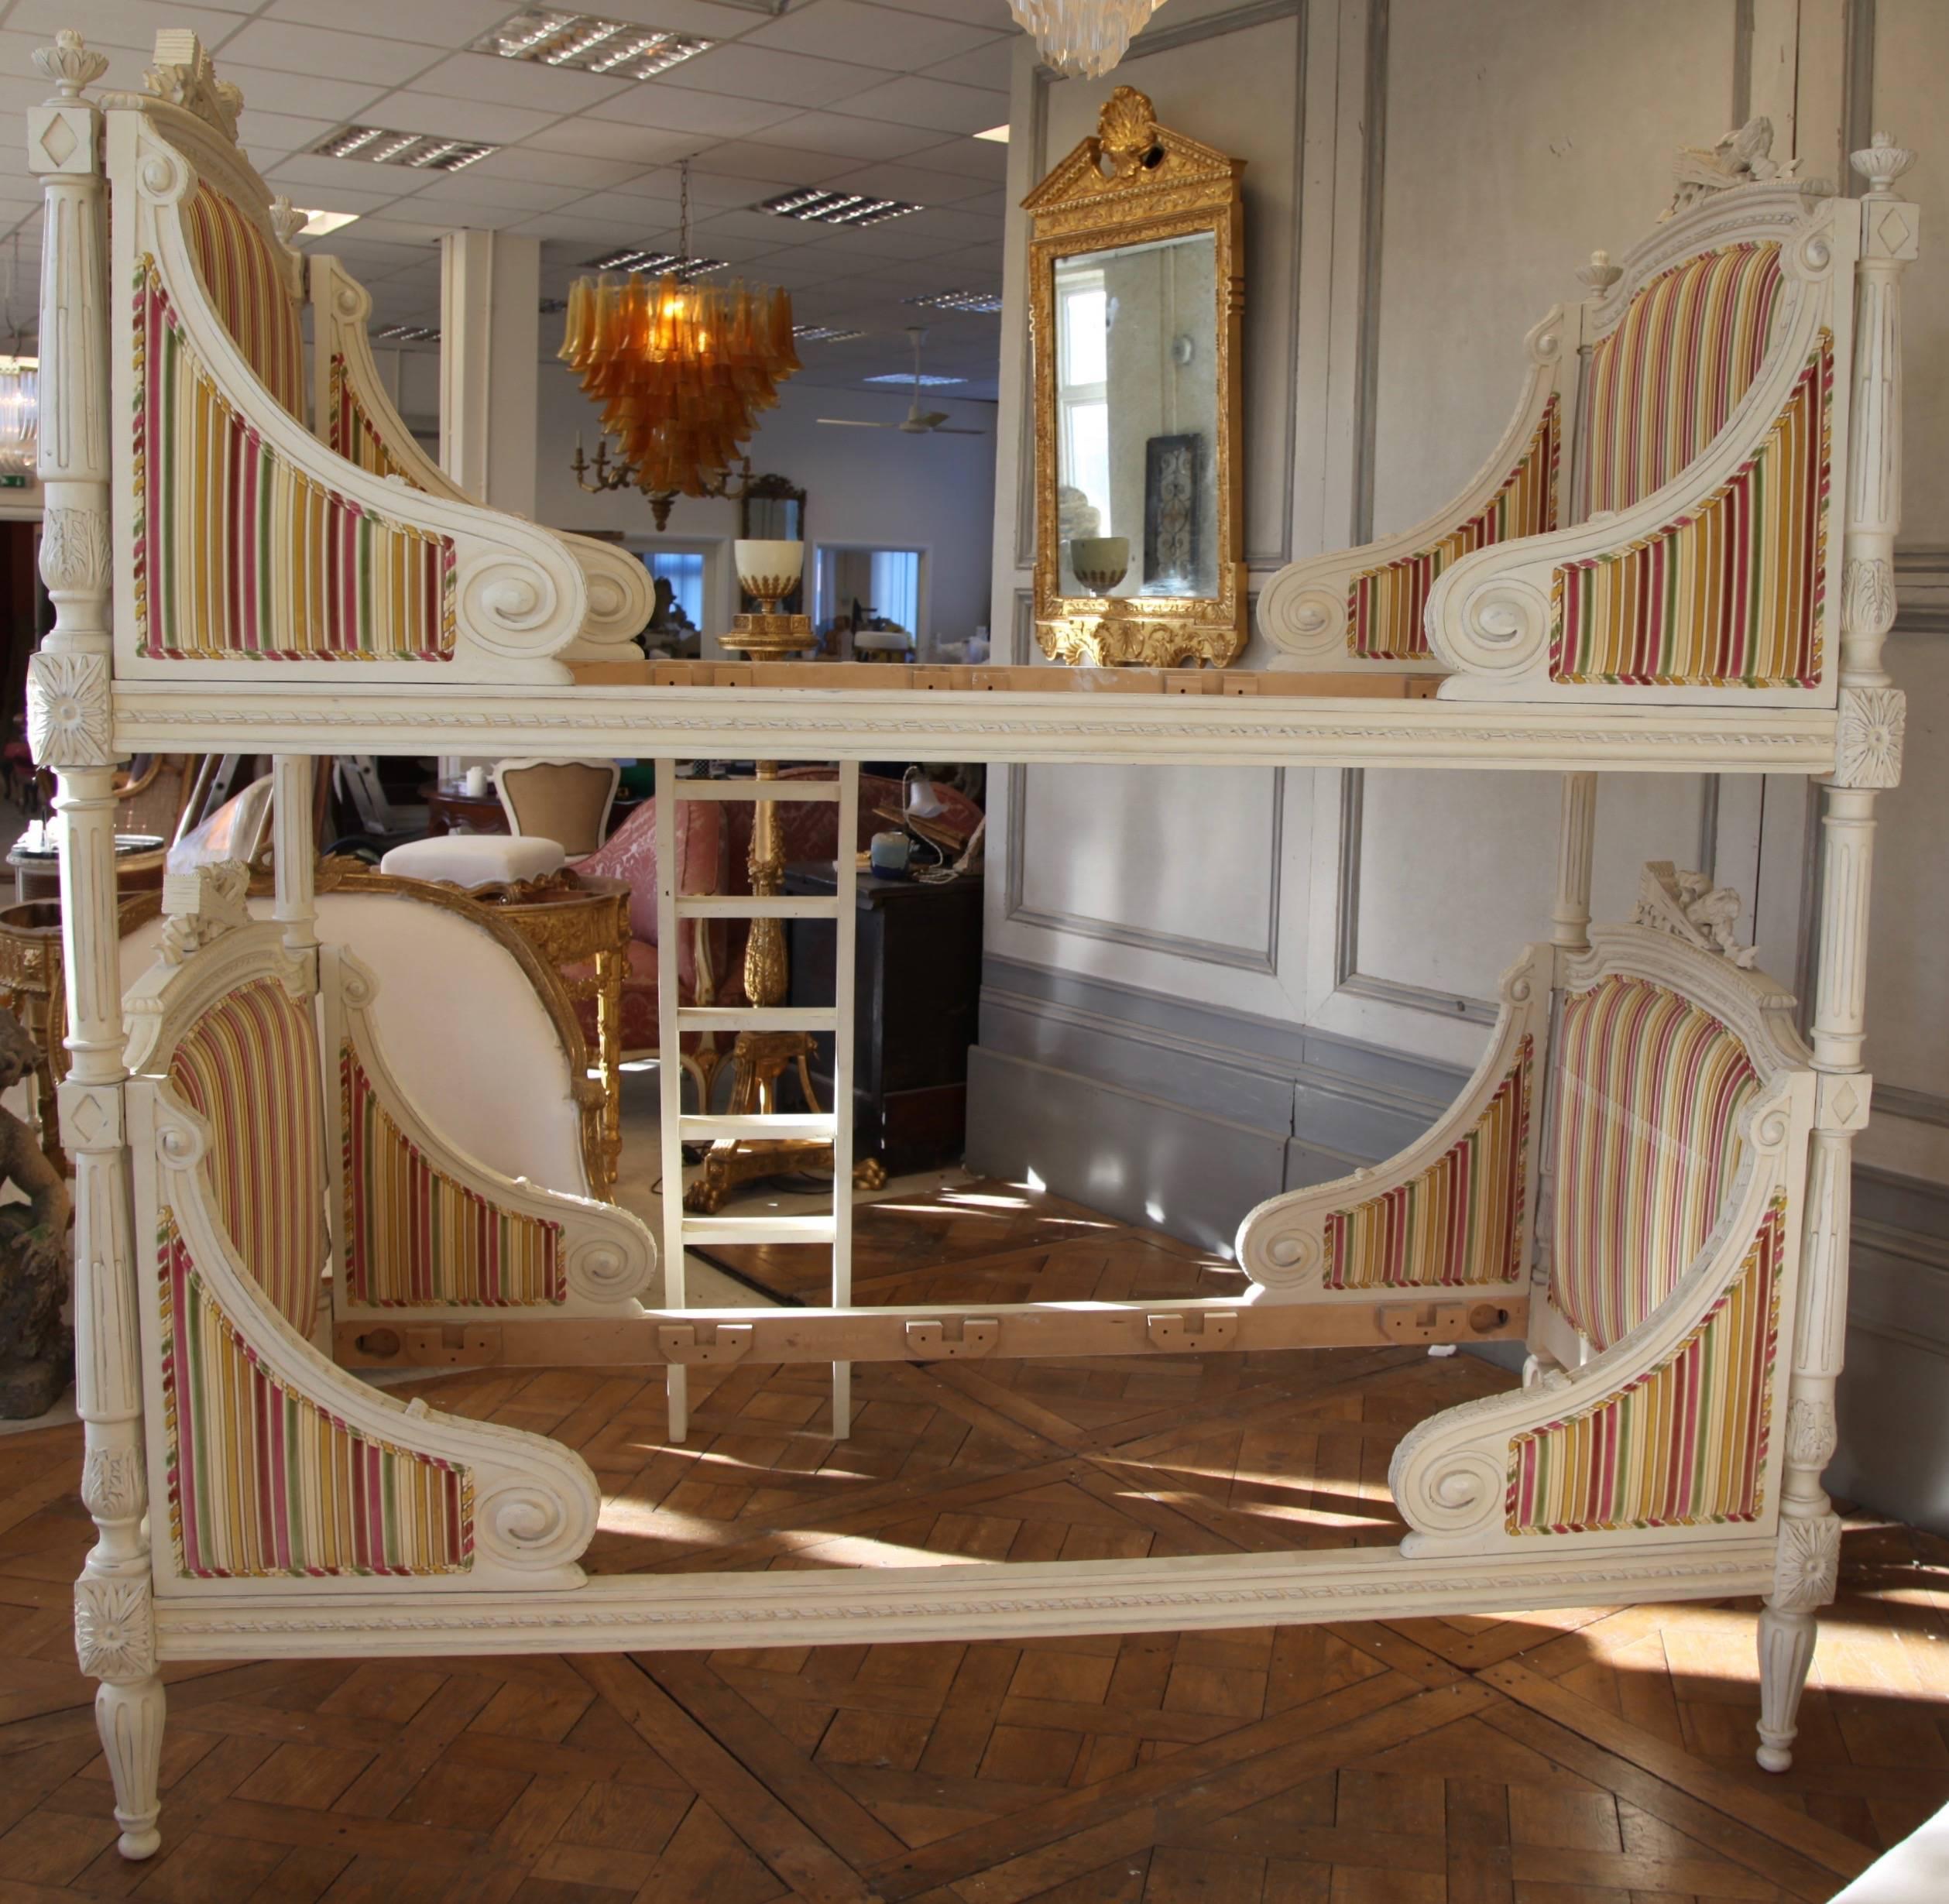 Louis XVI style bunk beds, hand-carved and hand finished in an off-white, antique finish. Takes a mattress size: 90cm x 200cm (3ft x 6ft6'). The beds come with an extra set of legs, finials and columns so they can also be set up as a matching pair